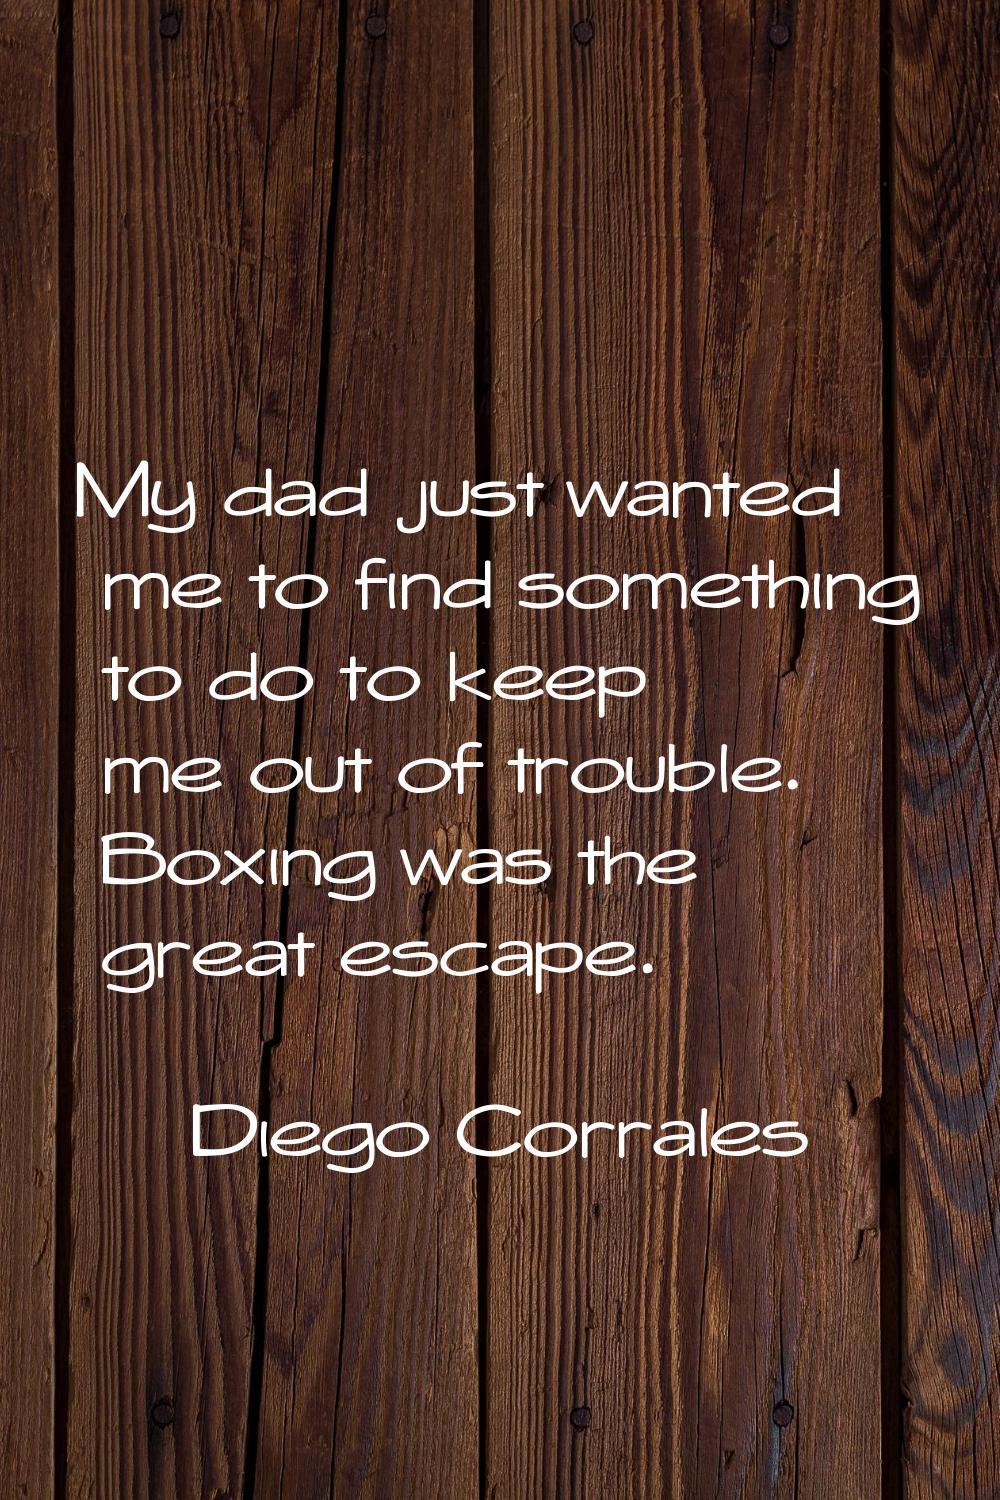 My dad just wanted me to find something to do to keep me out of trouble. Boxing was the great escap